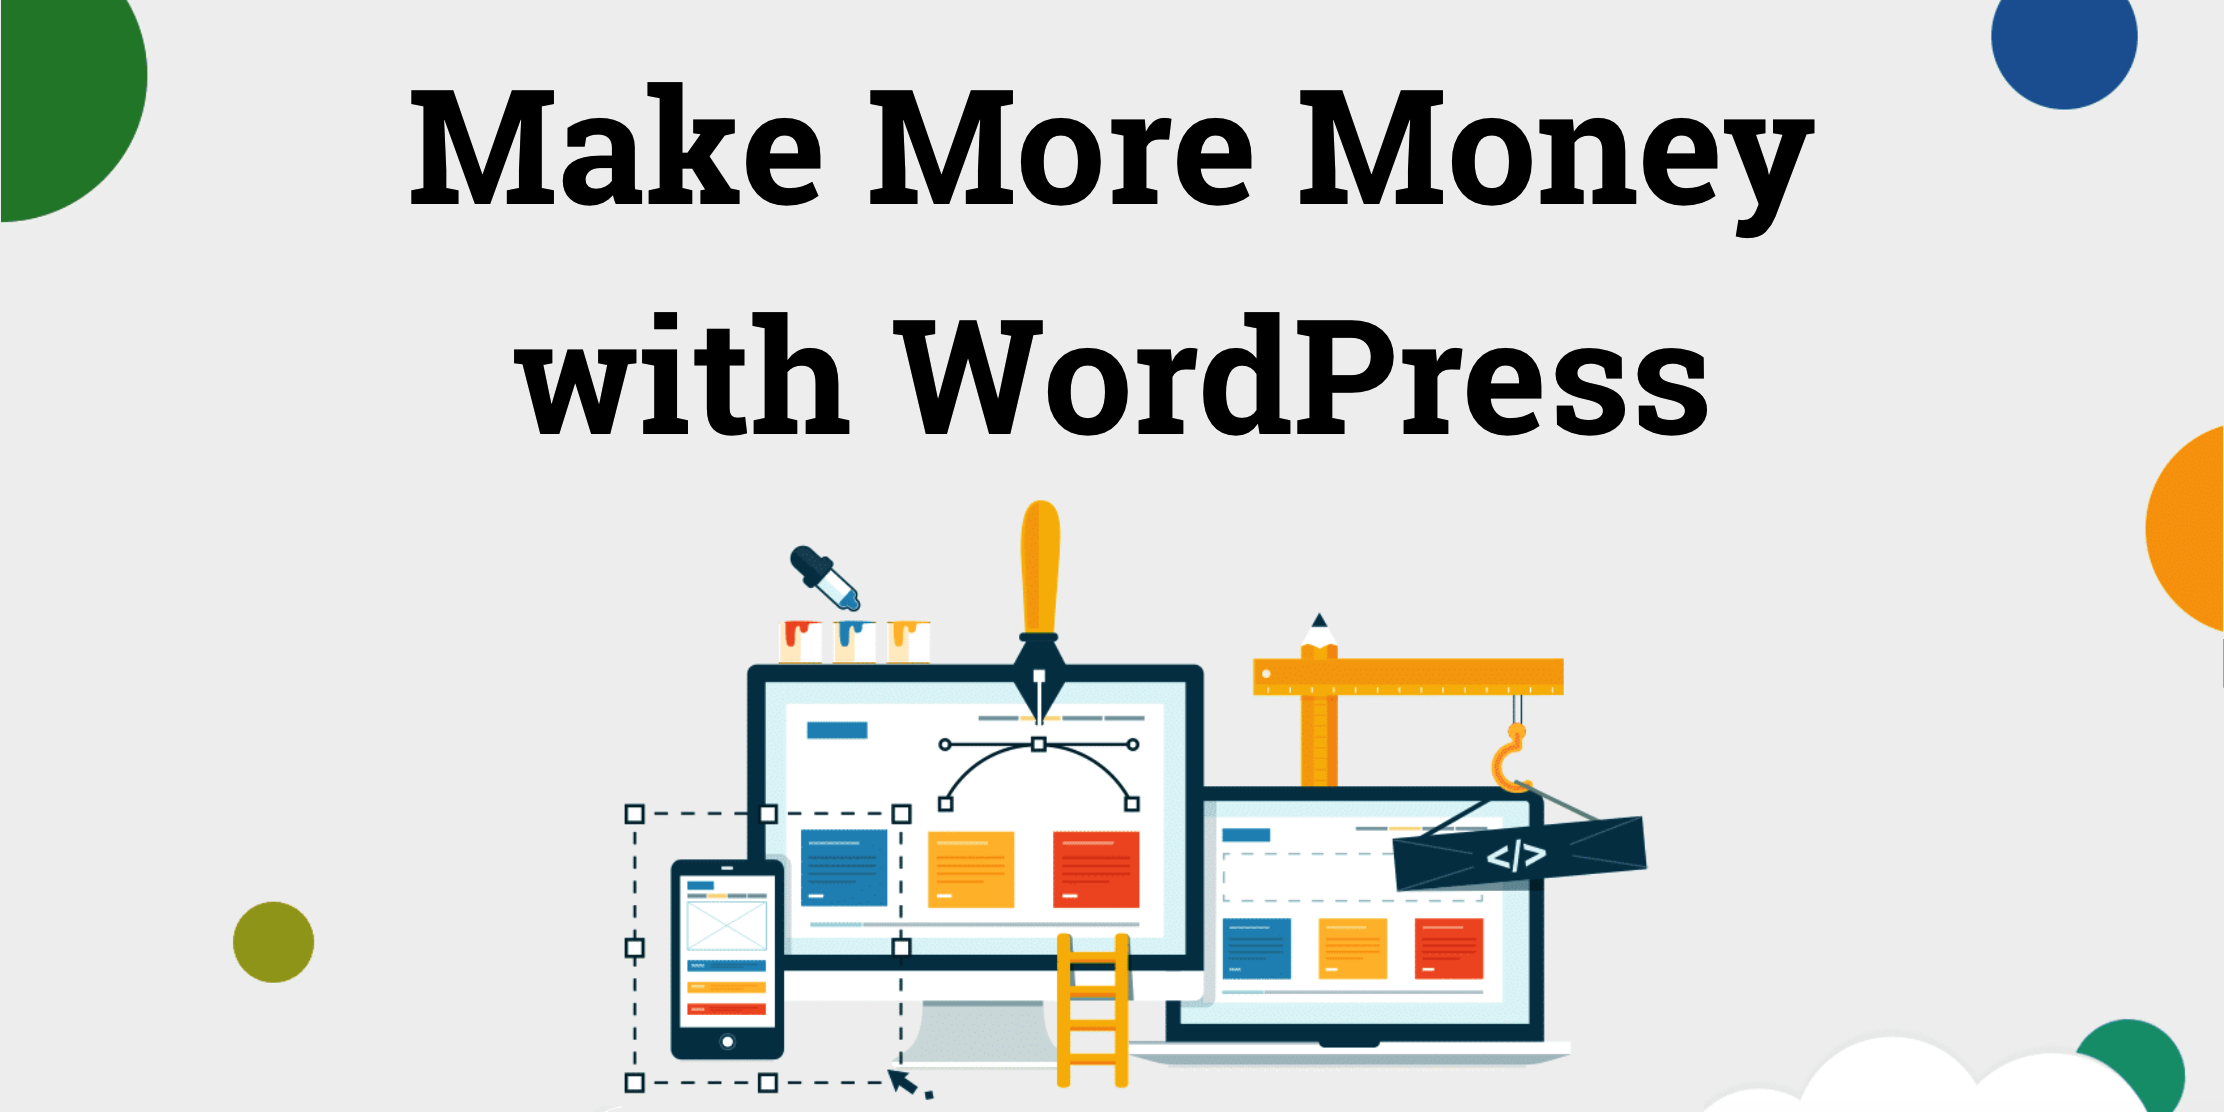 How to Make More Money with WordPress